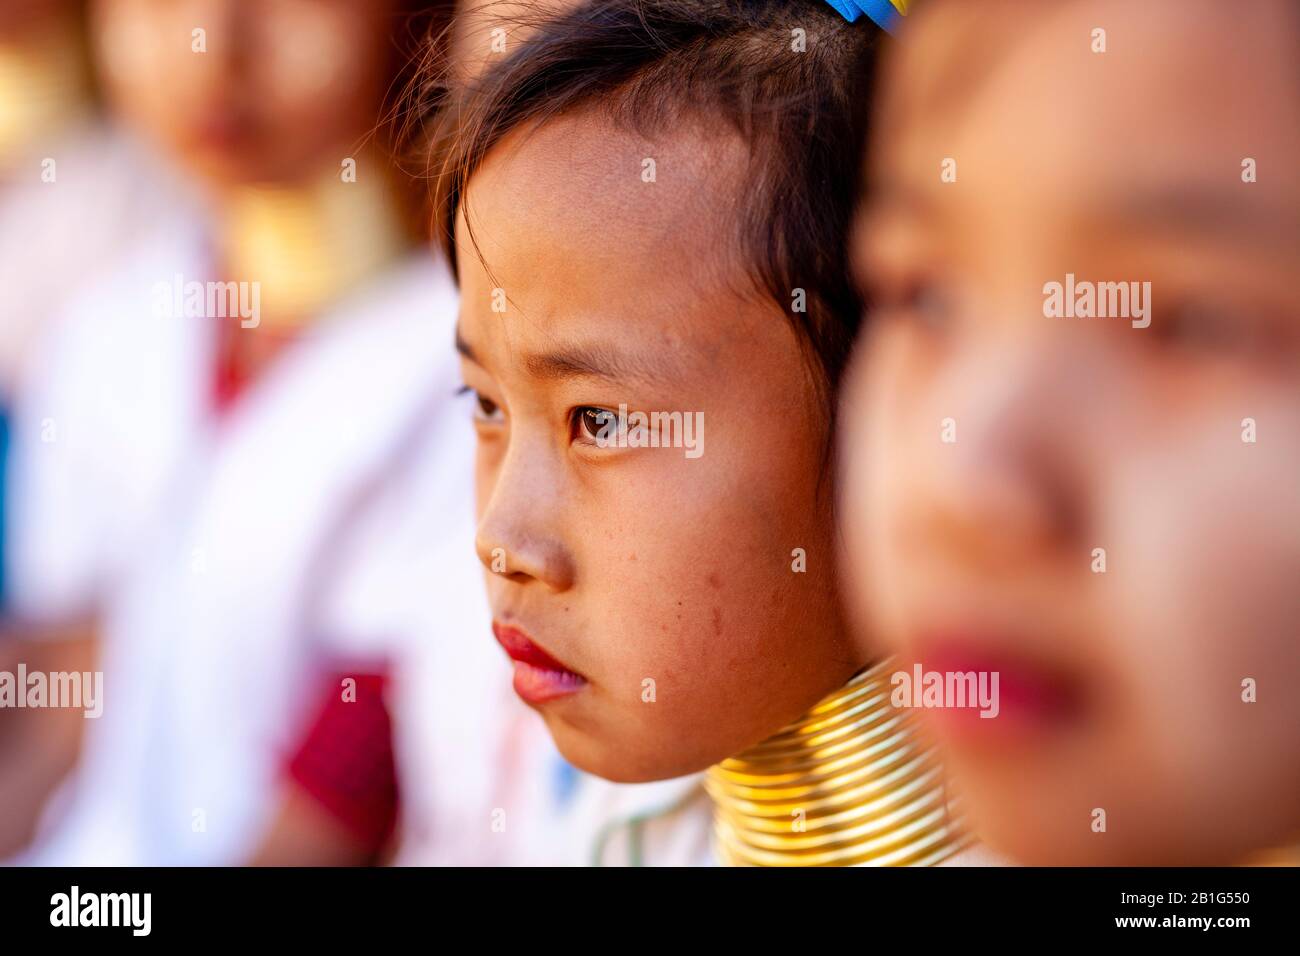 A Group Of Children From The Kayan (Long Neck) Minority Group In Traditional Costume, Pan Pet Village, Loikaw, Kayah State, Myanmar. Stock Photo